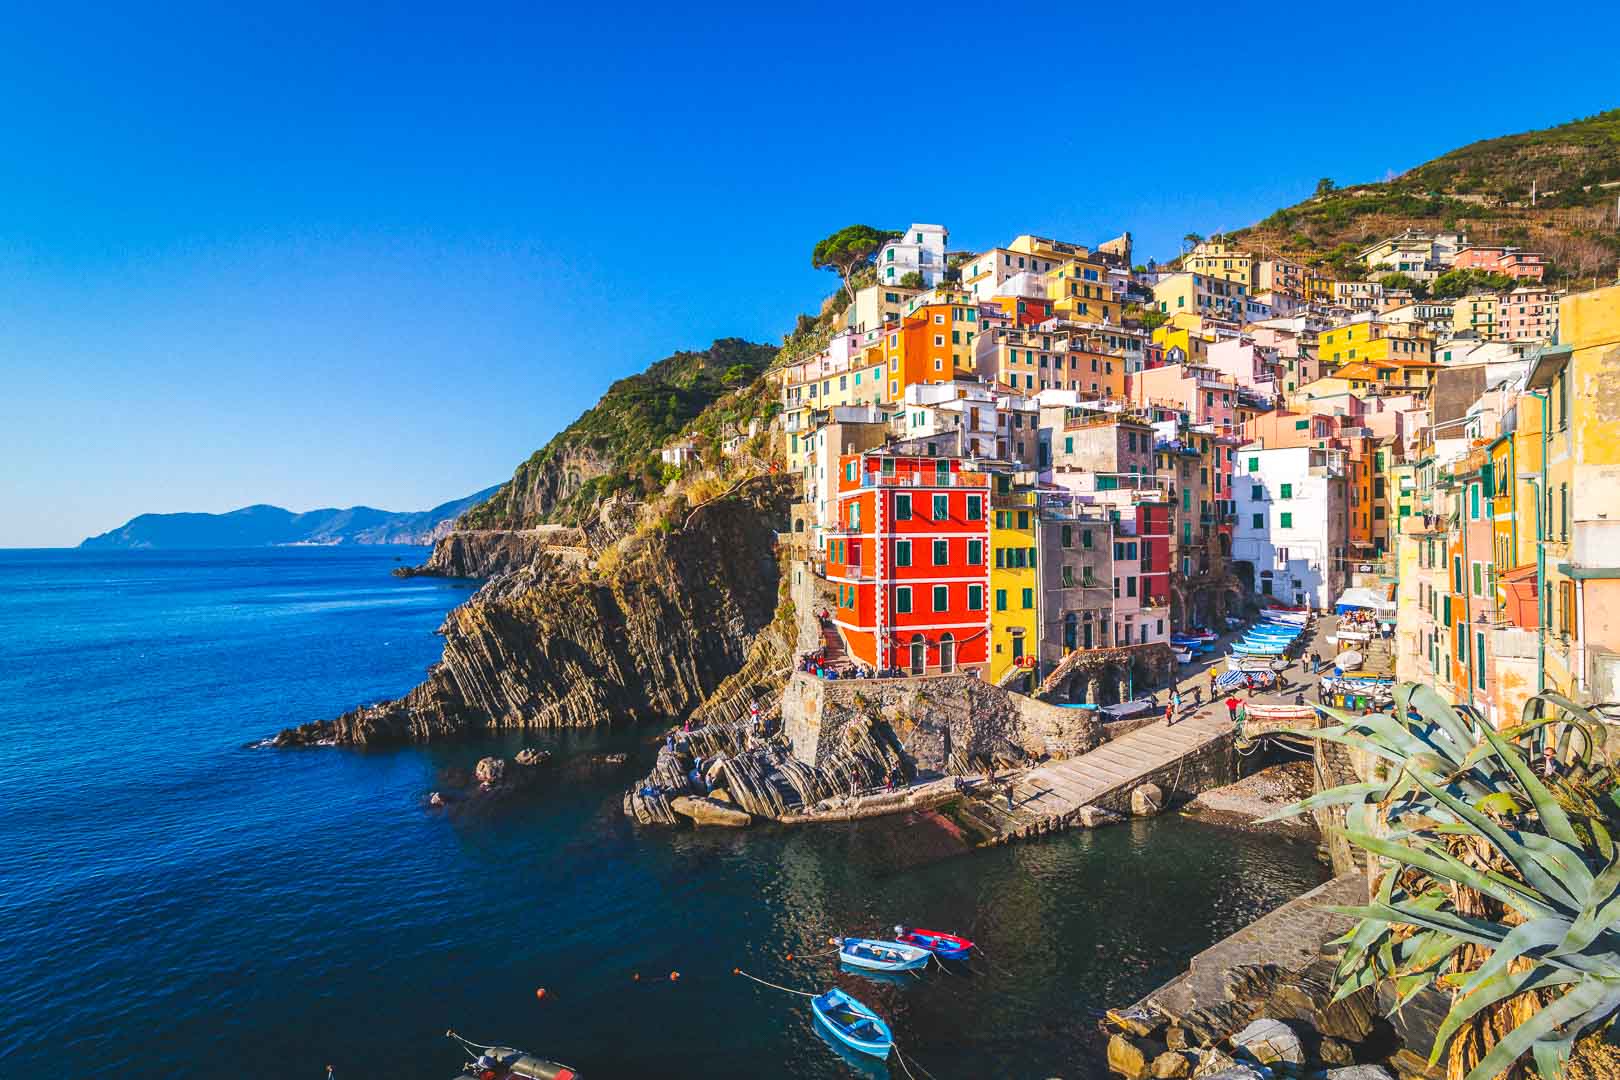 cinque terre is in the famous natural landmarks in italy